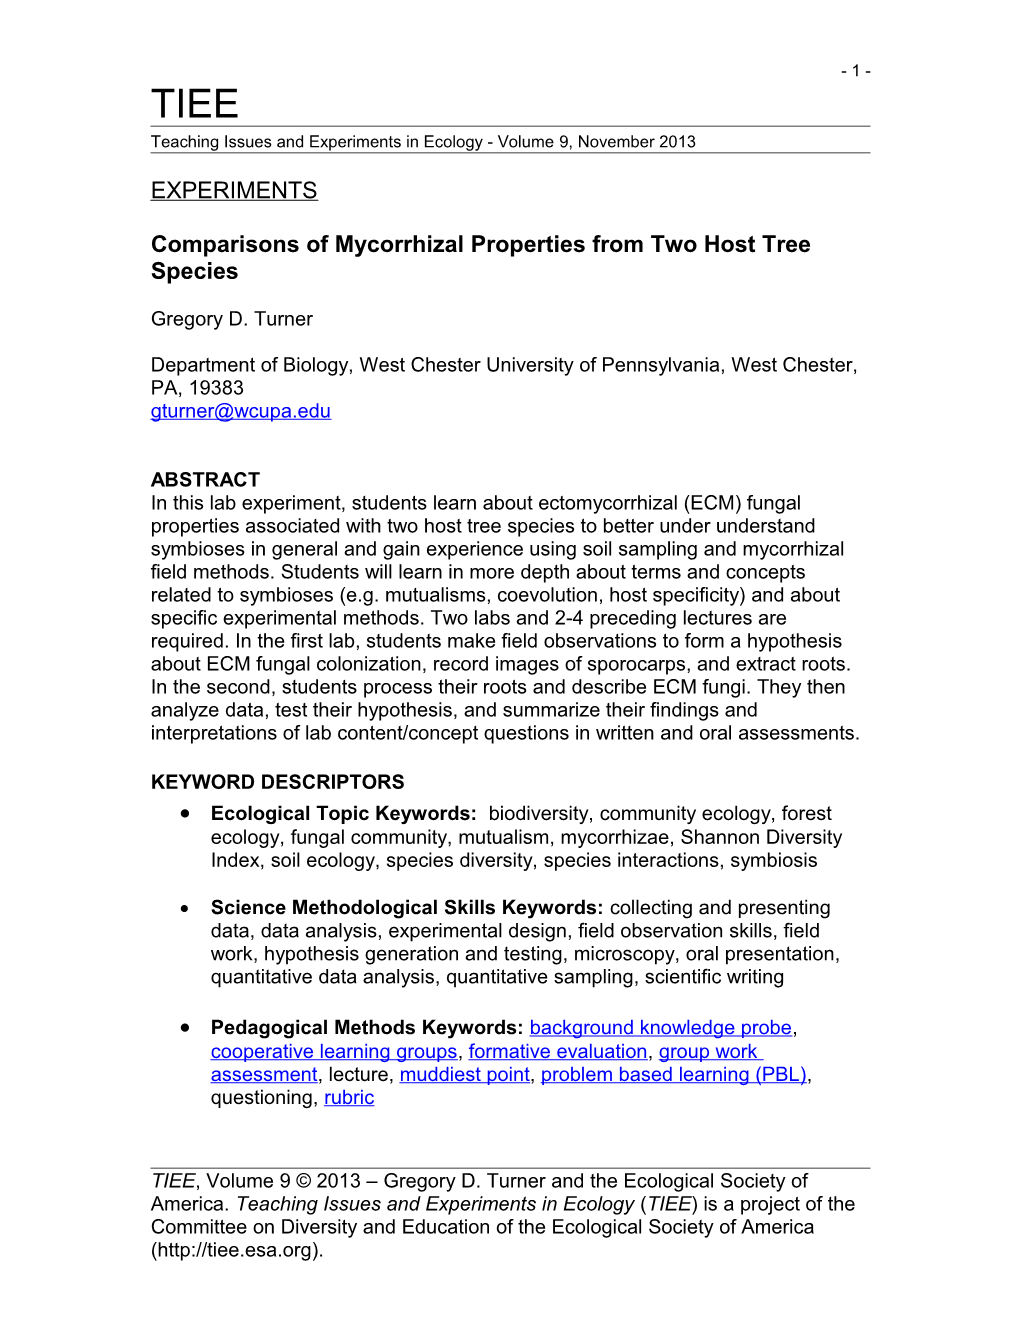 Comparisons of Mycorrhizal Properties from Two Host Tree Species